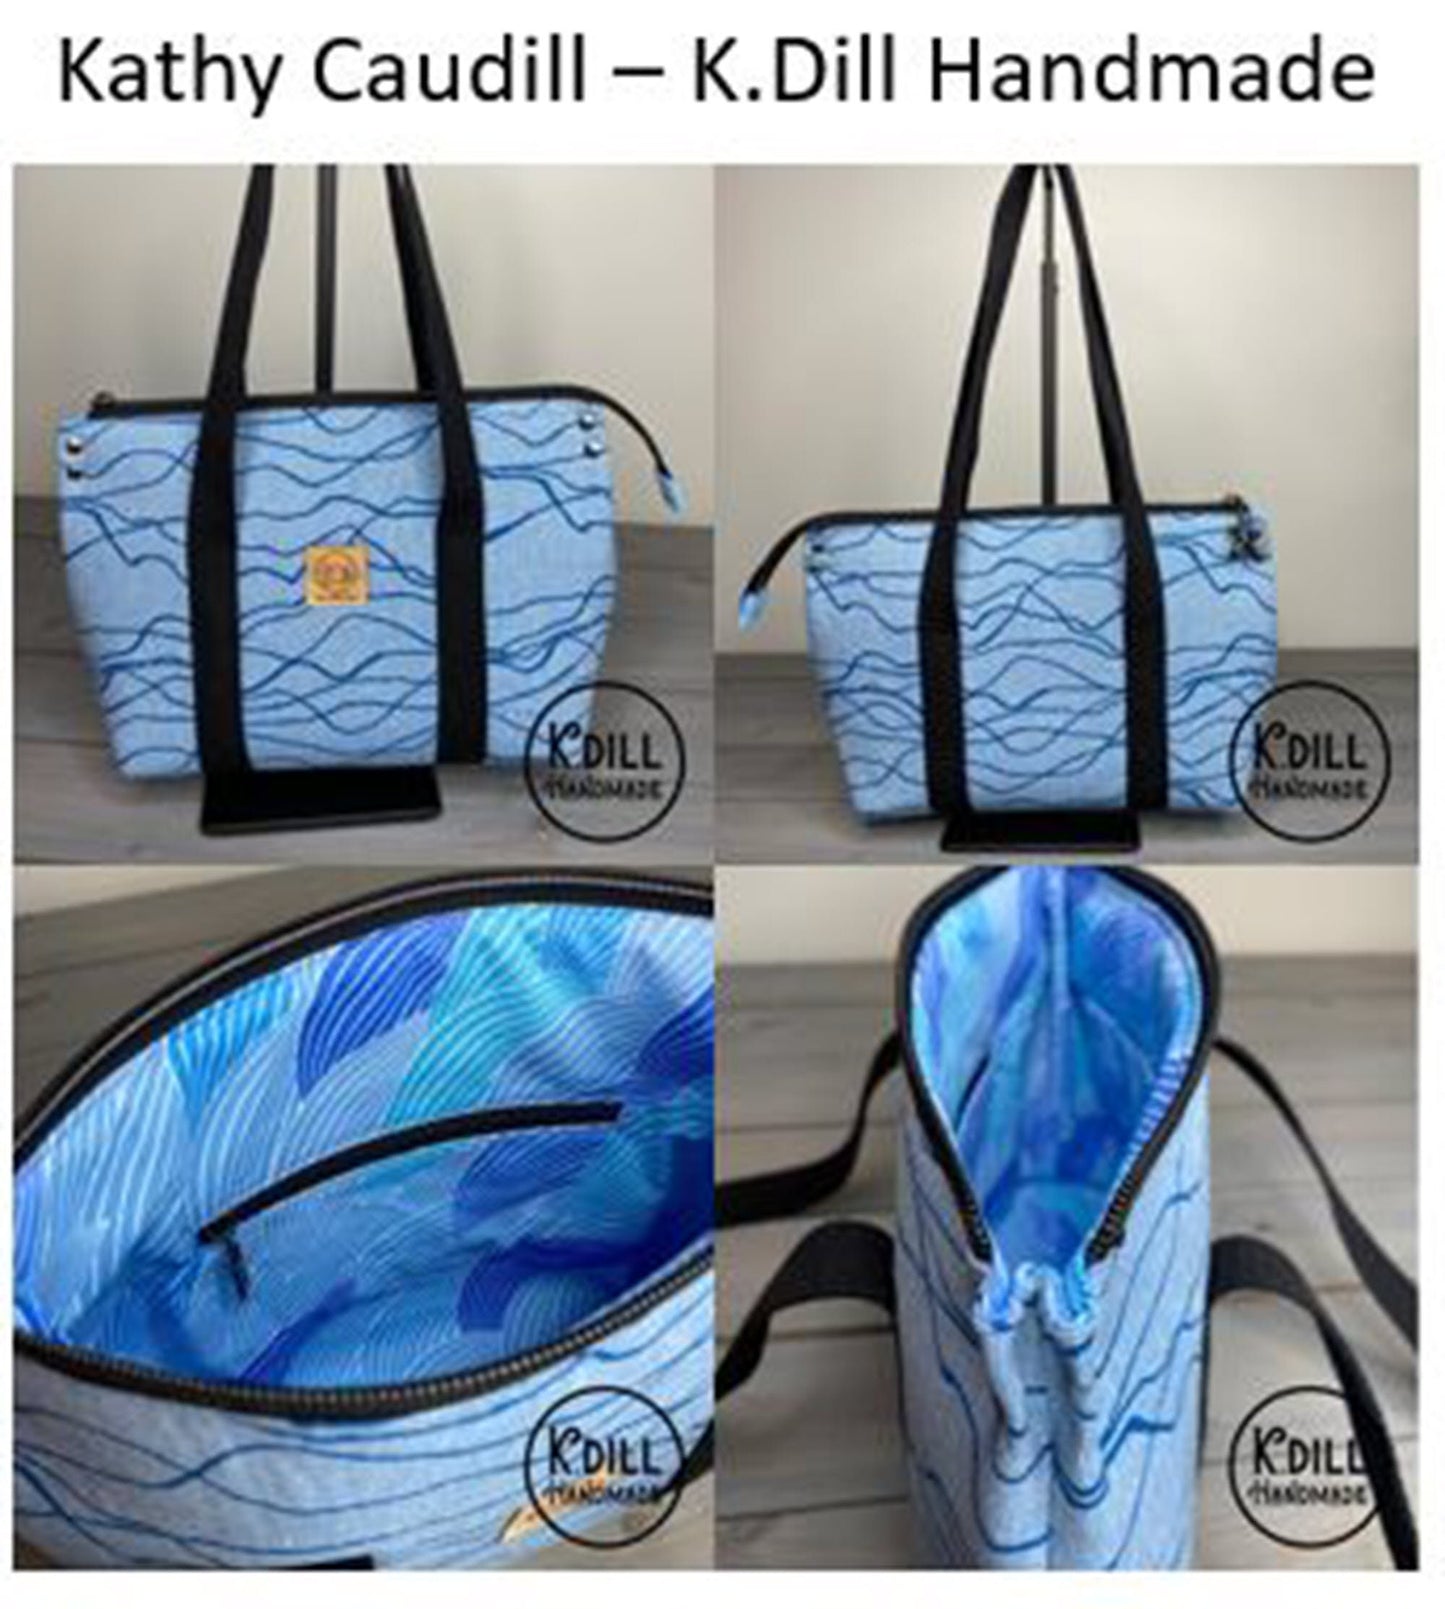 PDF Pattern and Video Tutorial - Big Mouth Bag by KMGhandmade